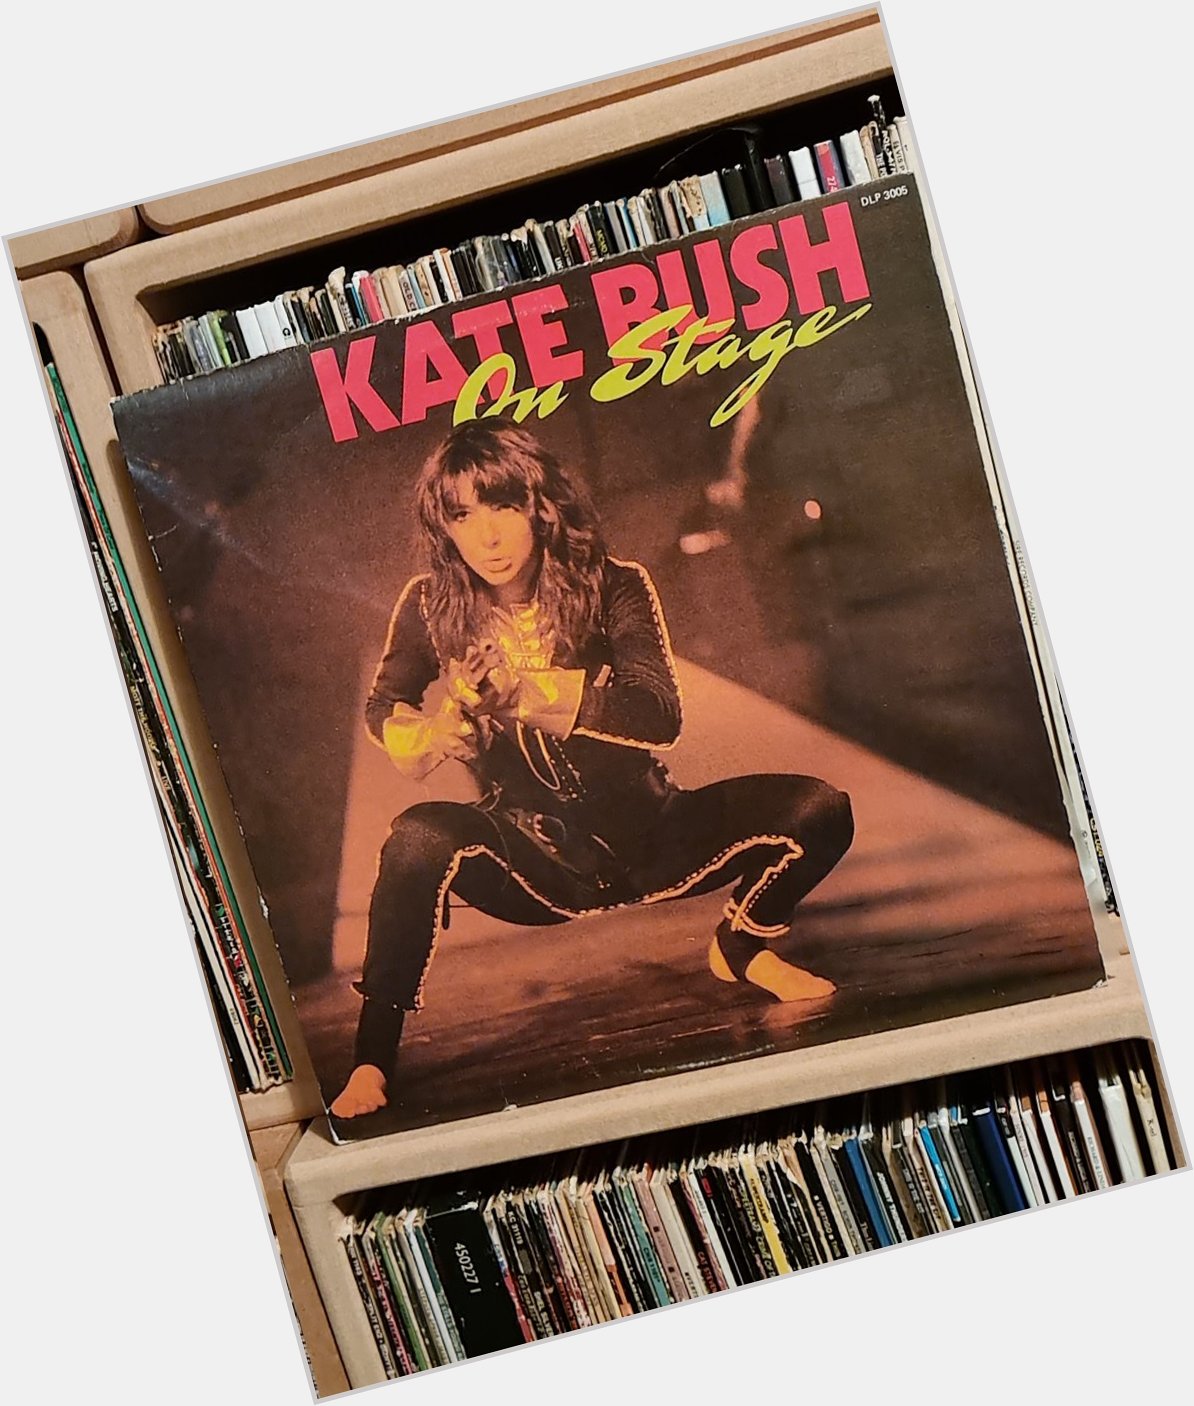 A last happy birthday shout out to Kate Bush. I saw her on this tour. Comrades, Kate was awesome 